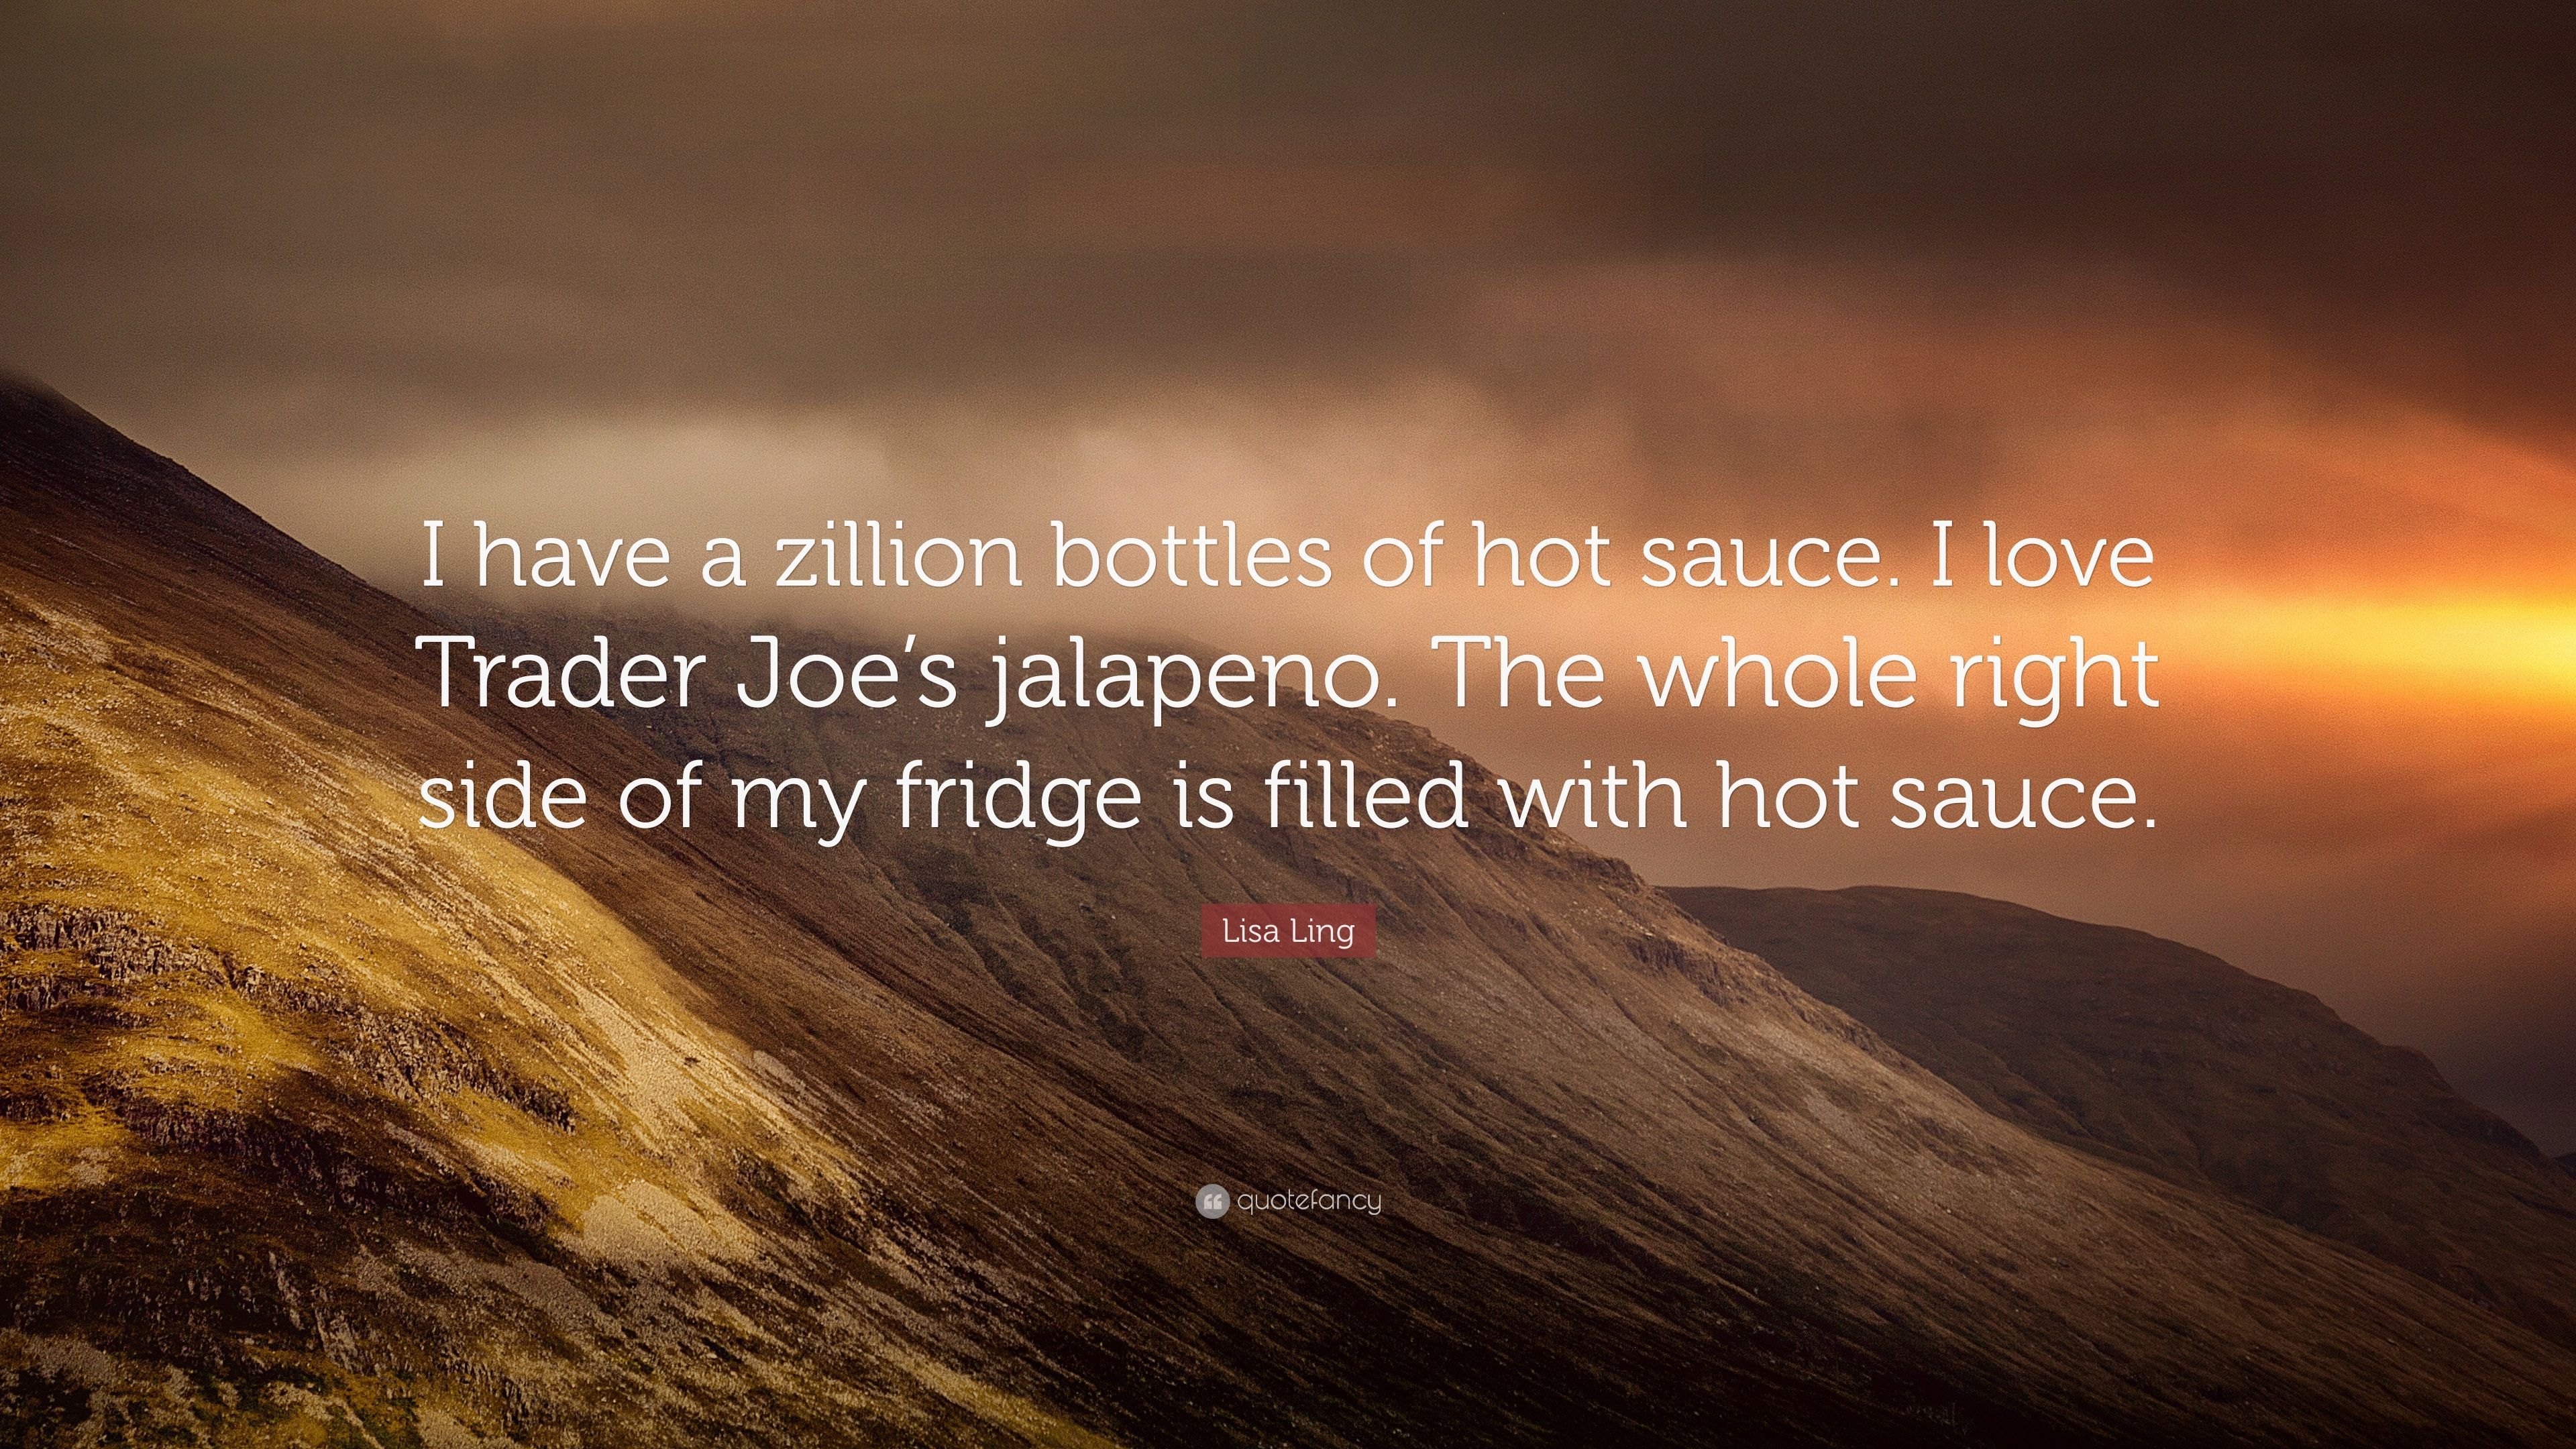 Lisa Ling Quote: “I have a zillion bottles of hot sauce. I love